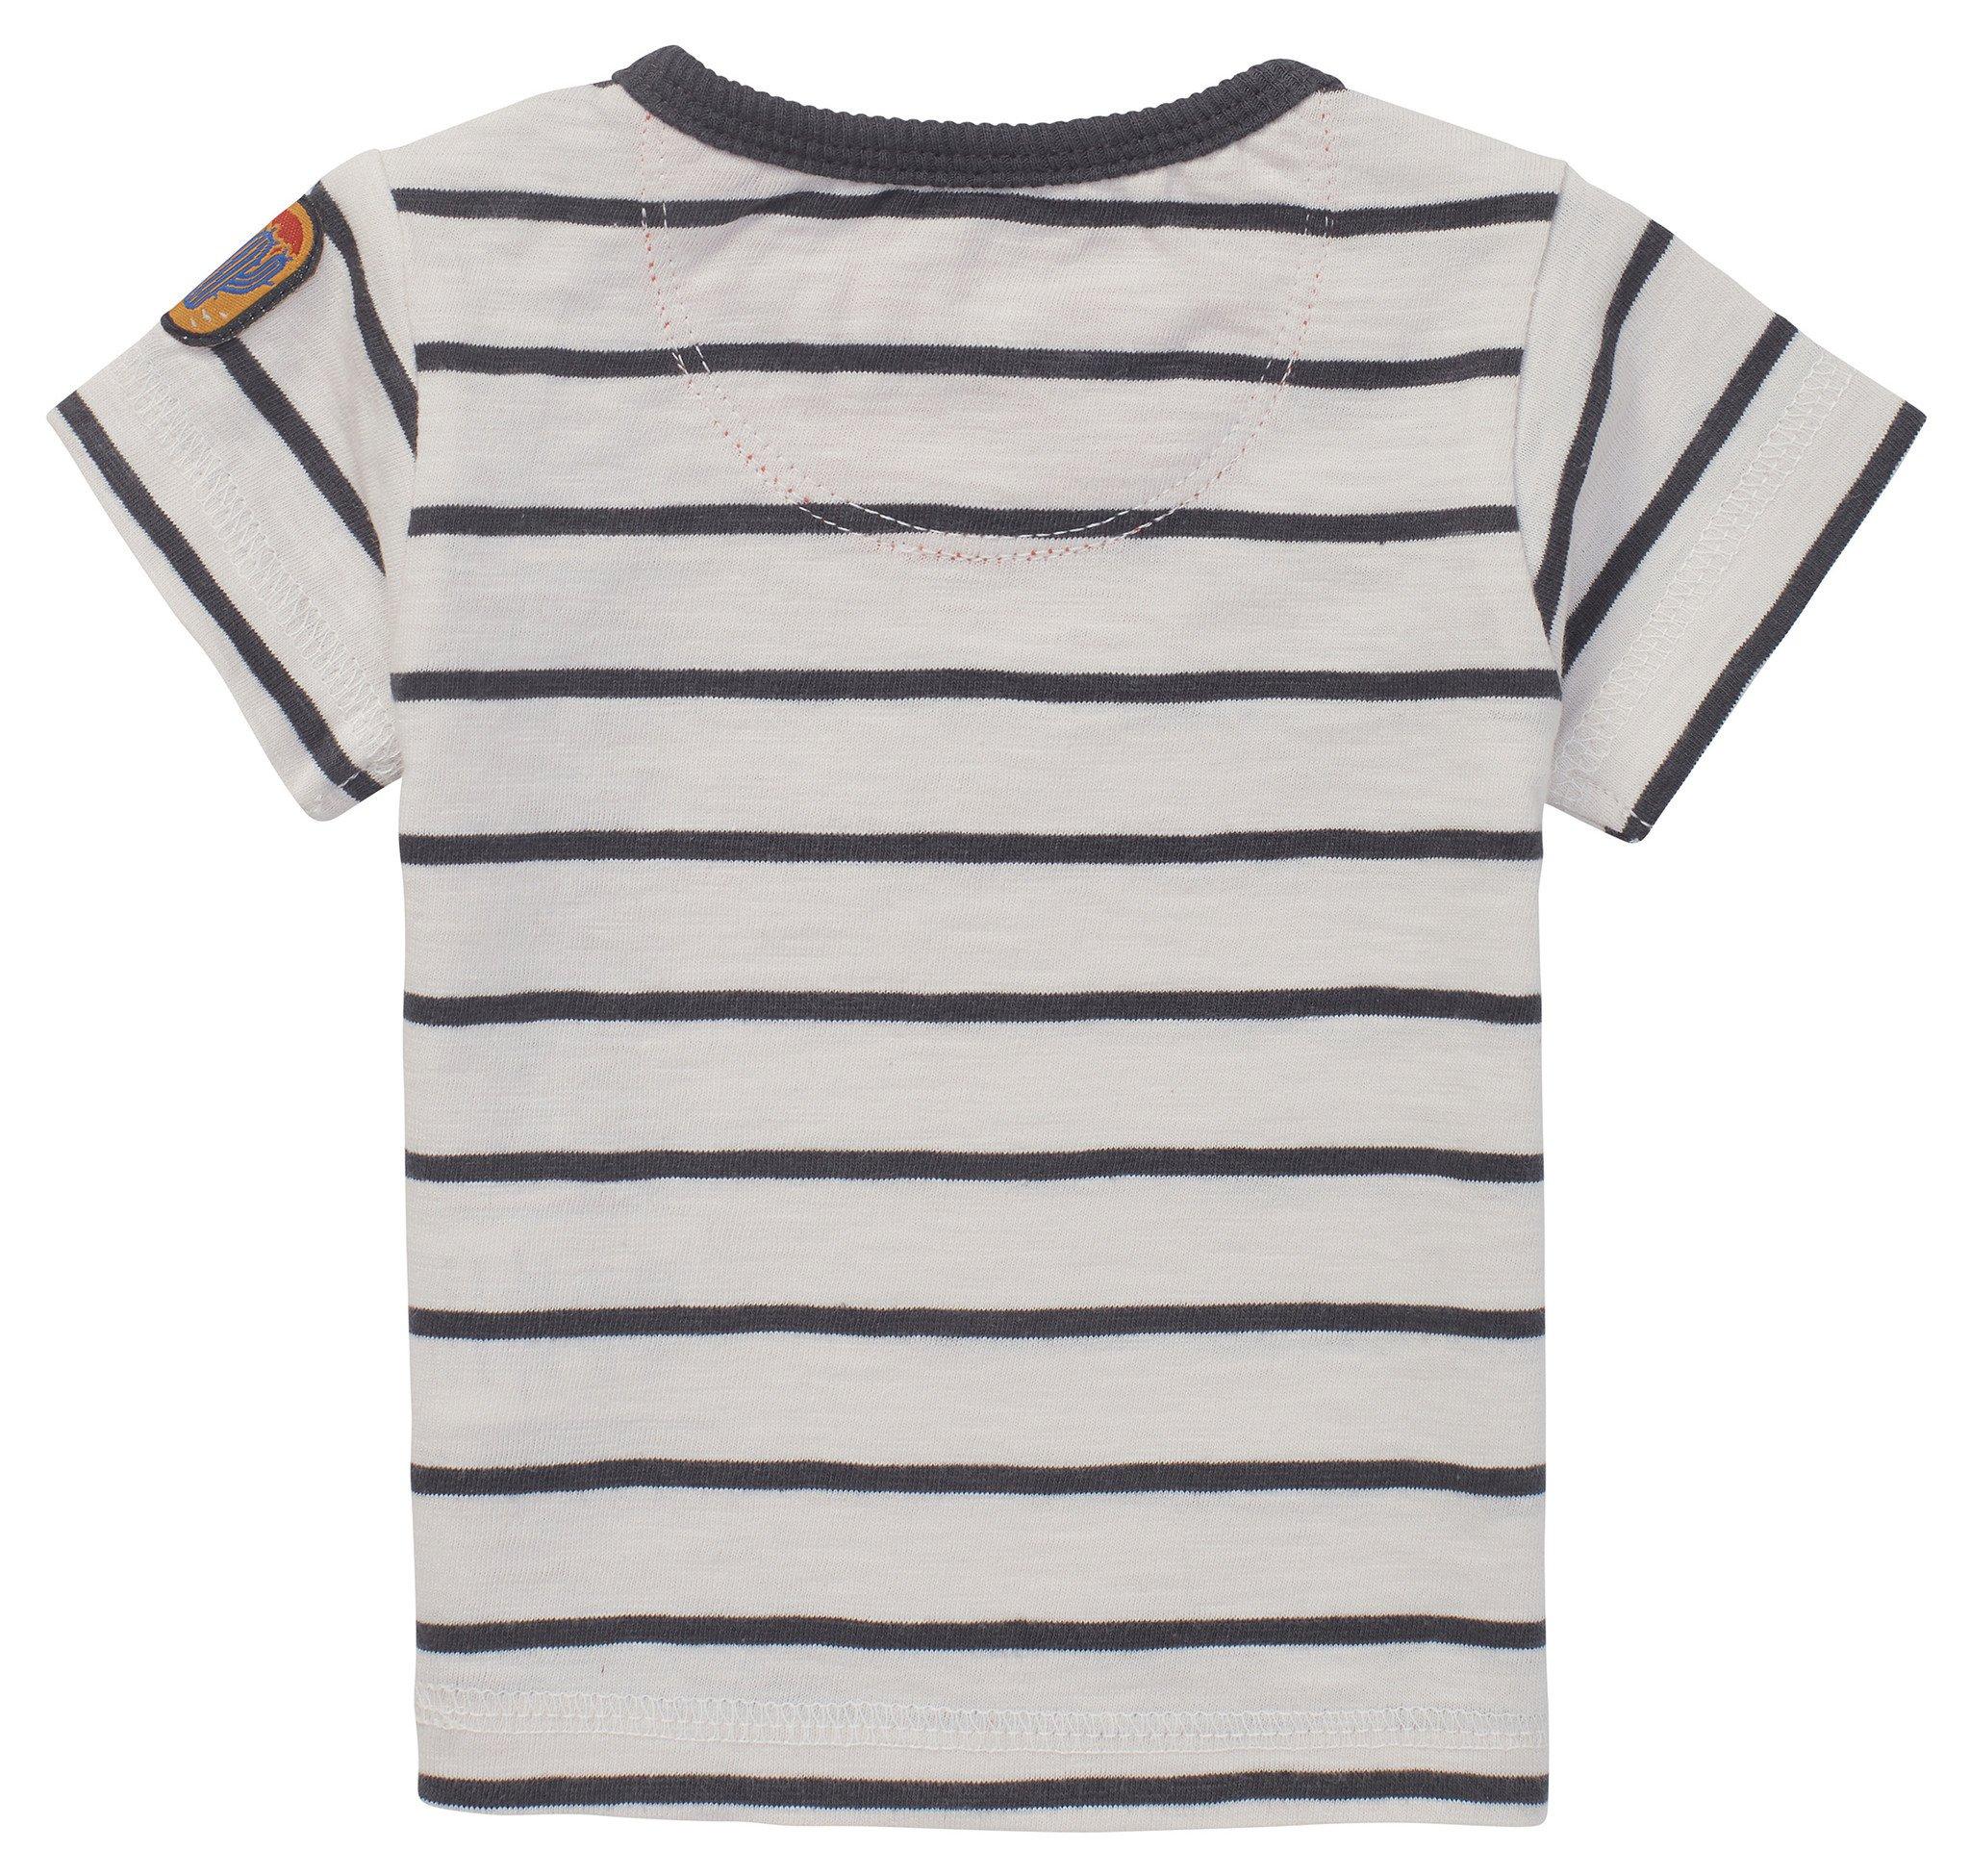 Noppies  Baby T-shirt Togoville 